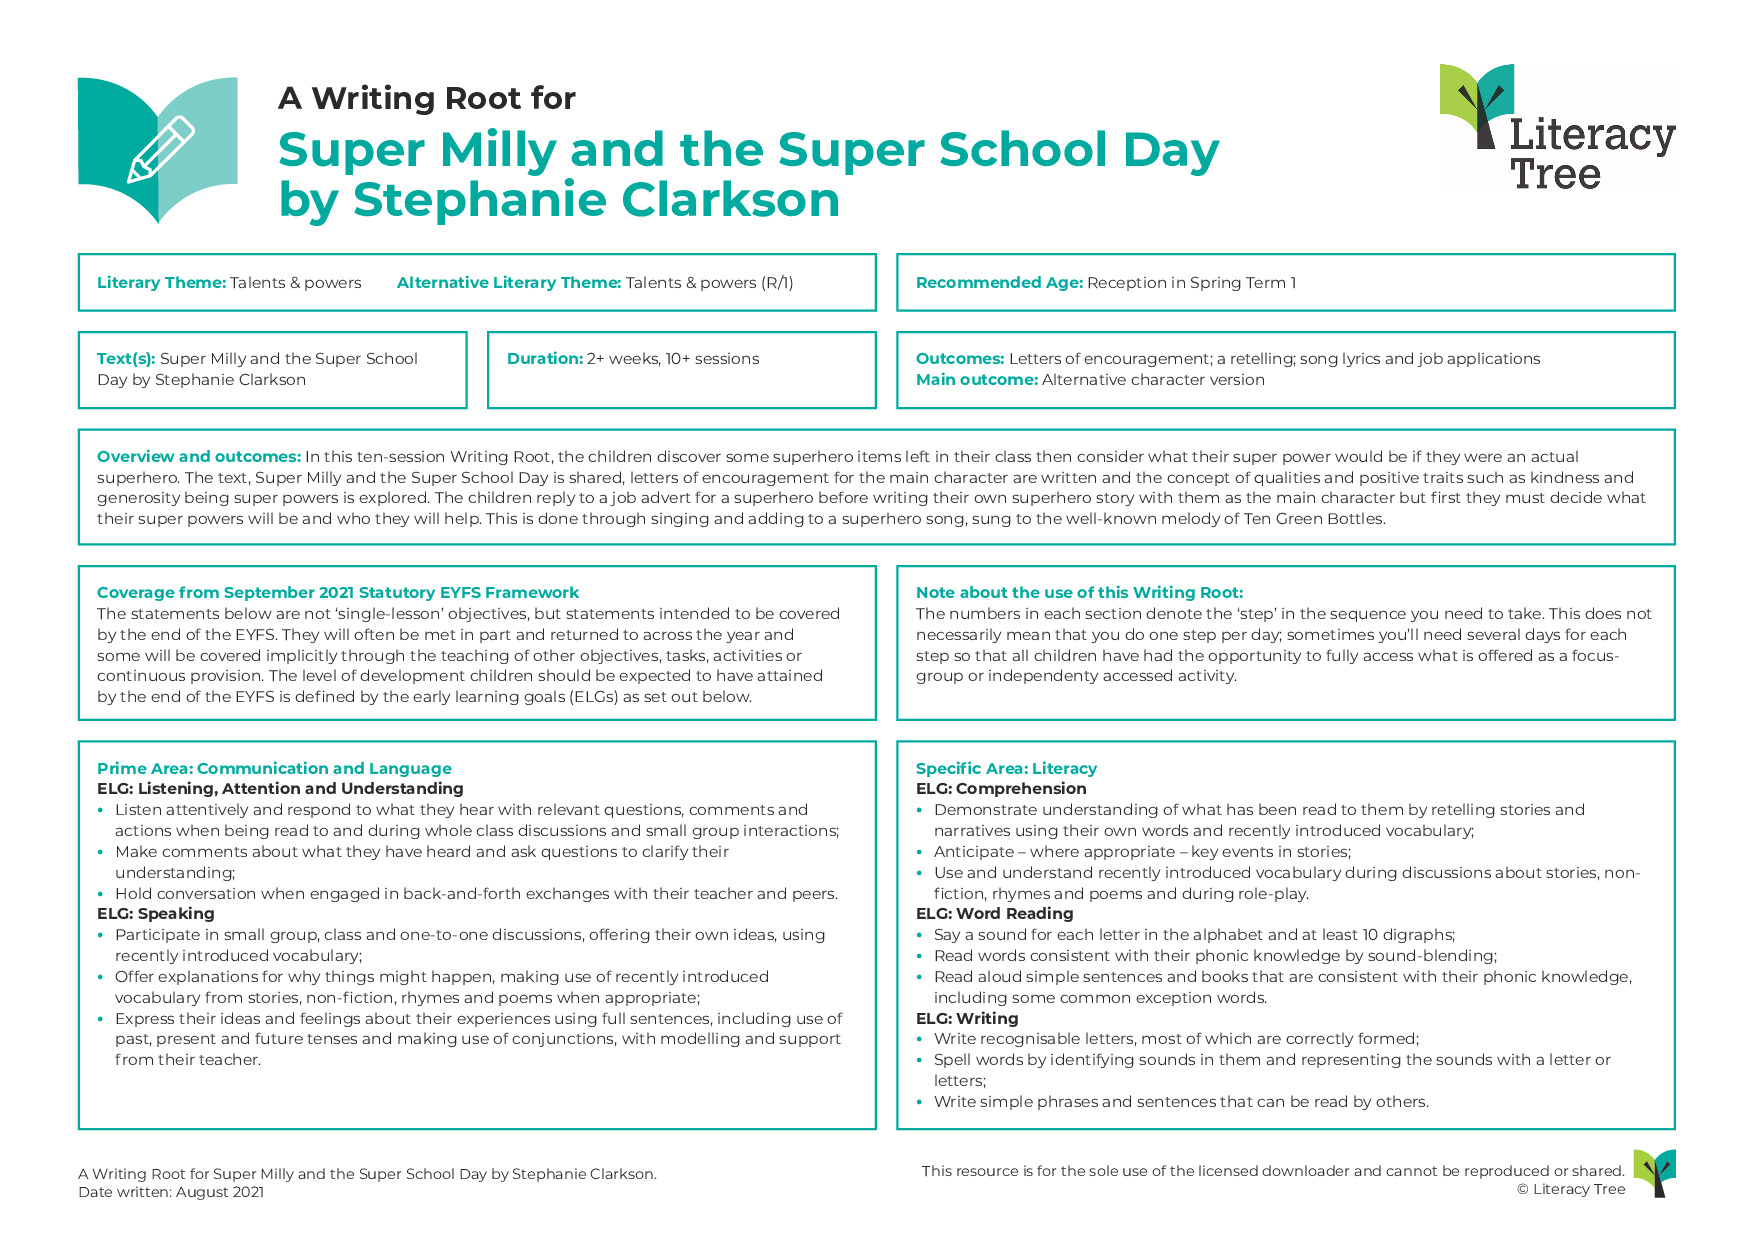 A Writing Root for Super Milly and the Super School Day